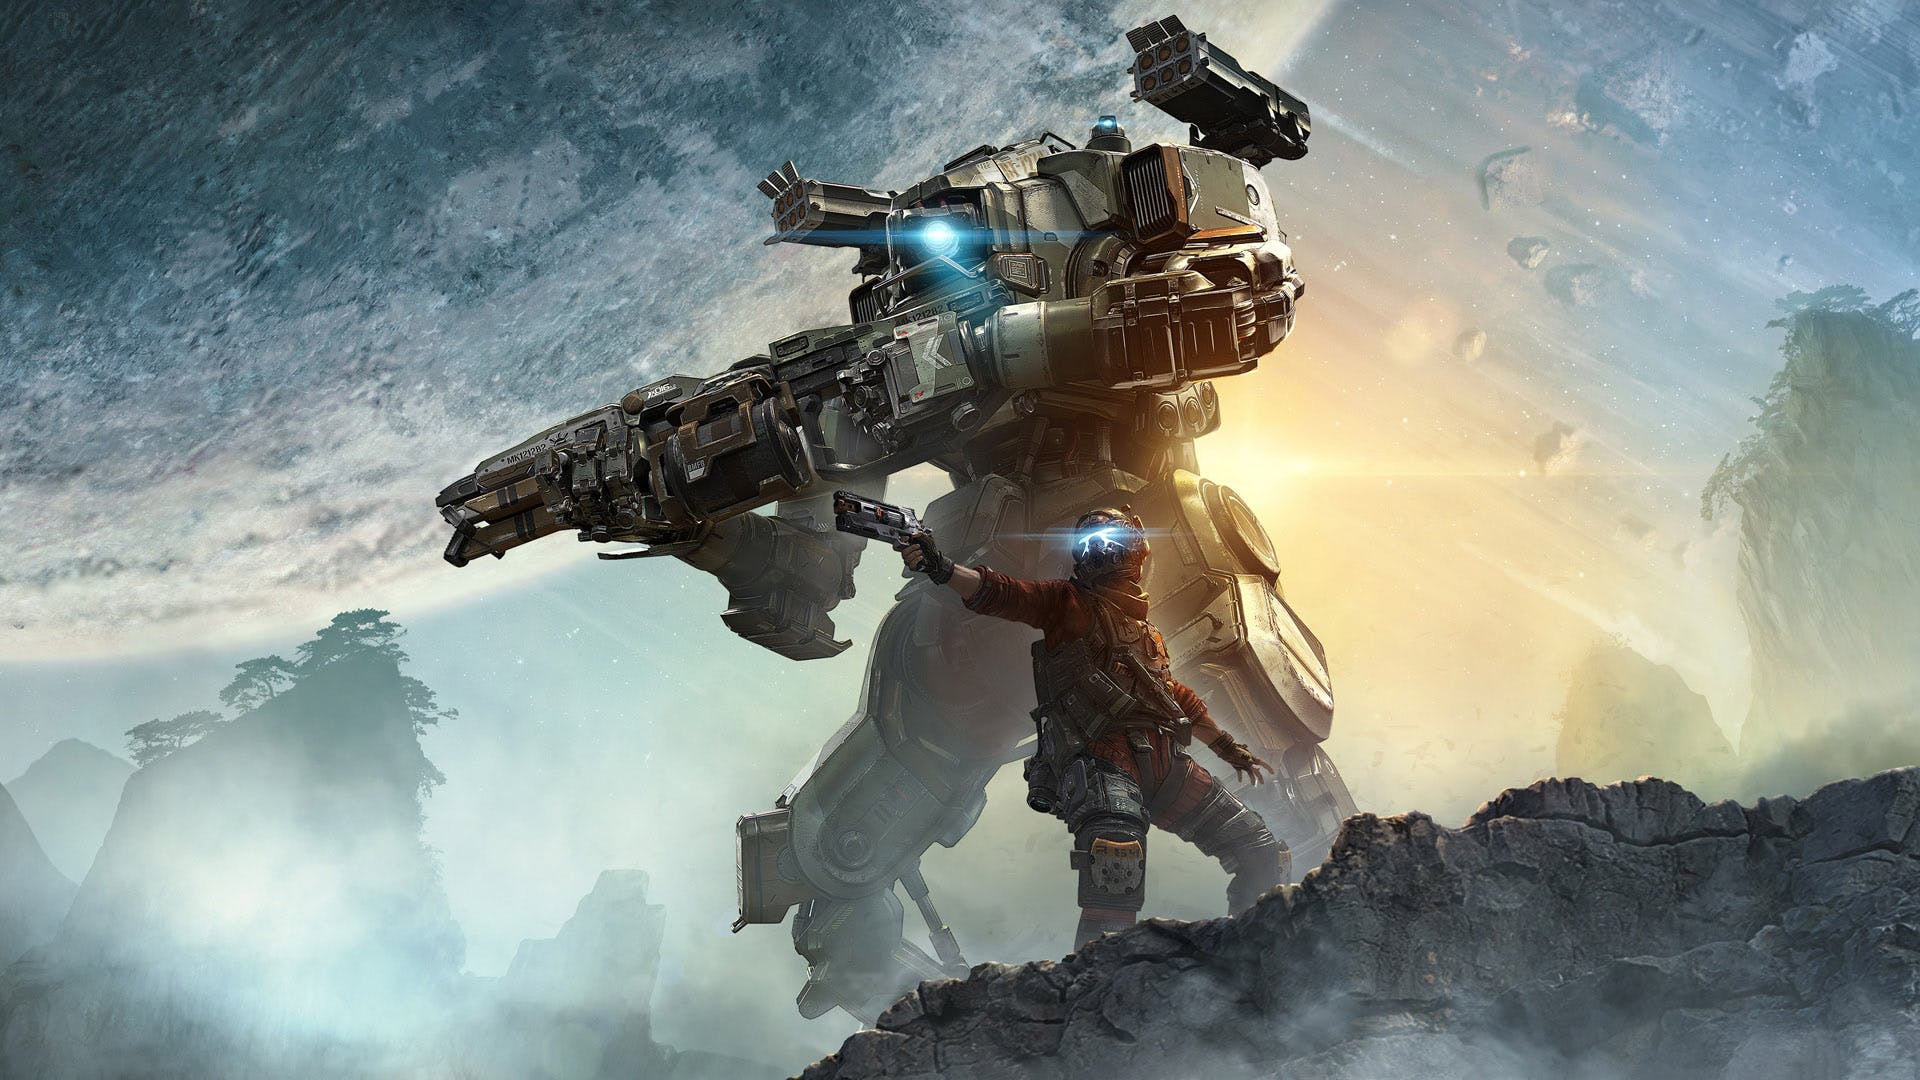 NVIDIA shows off 4K 60FPS footage of Titanfall 2 on PC